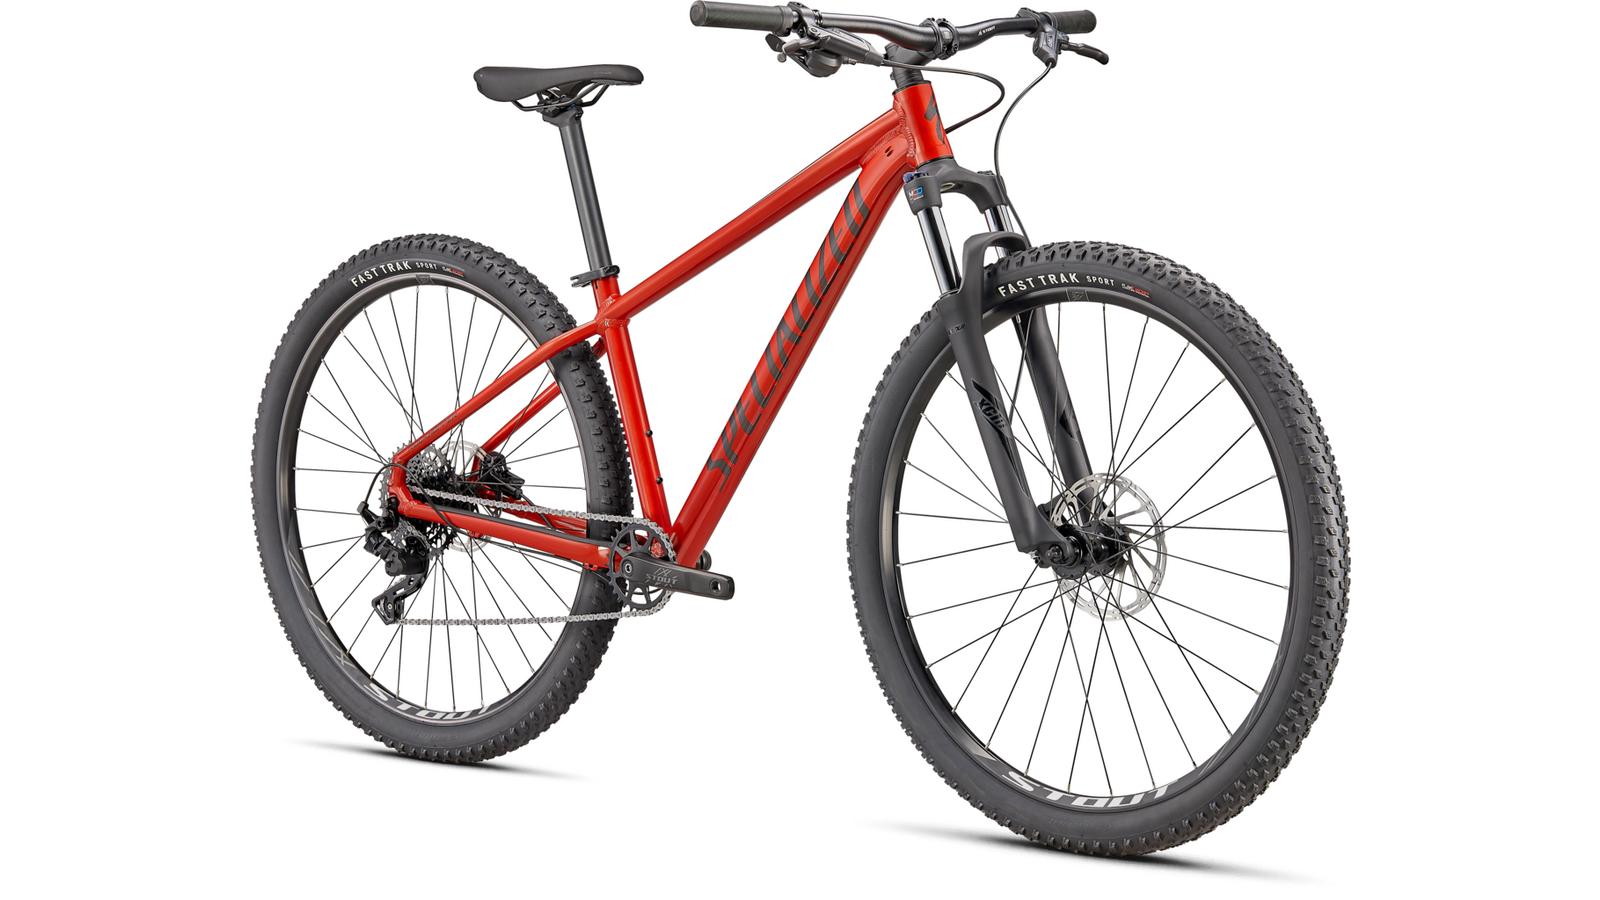 91822-5506-SPECIALIZED-ROCKHOPPER COMP 29-FOR-SALE-NEAR-ME